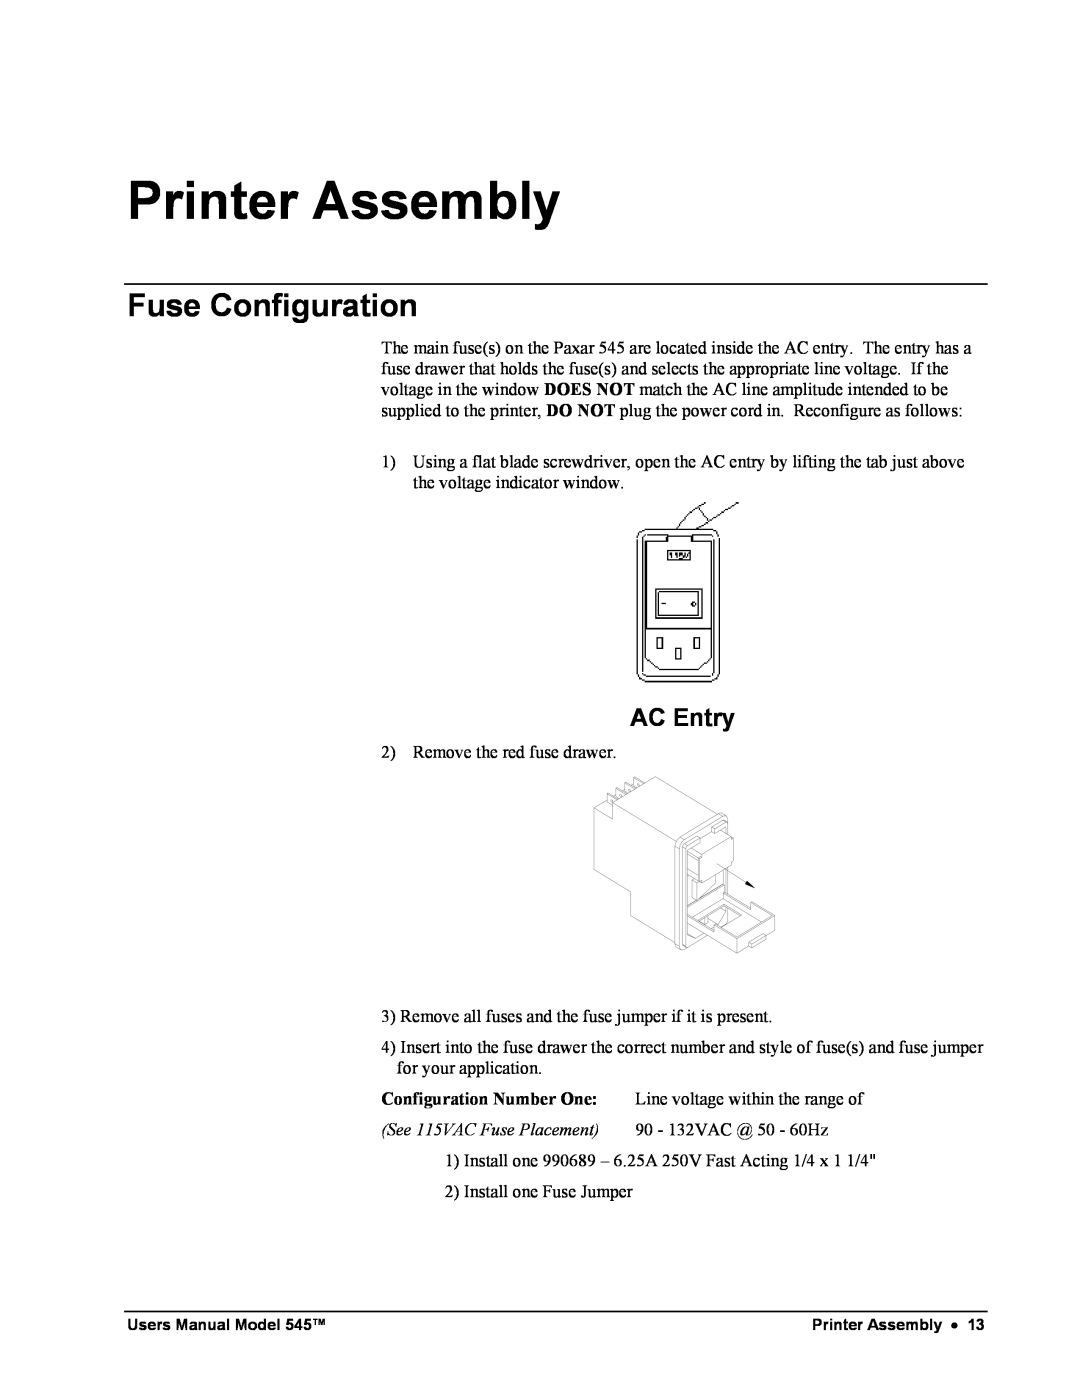 Paxar 545 user manual Printer Assembly, Fuse Configuration, AC Entry, See 115VAC Fuse Placement 